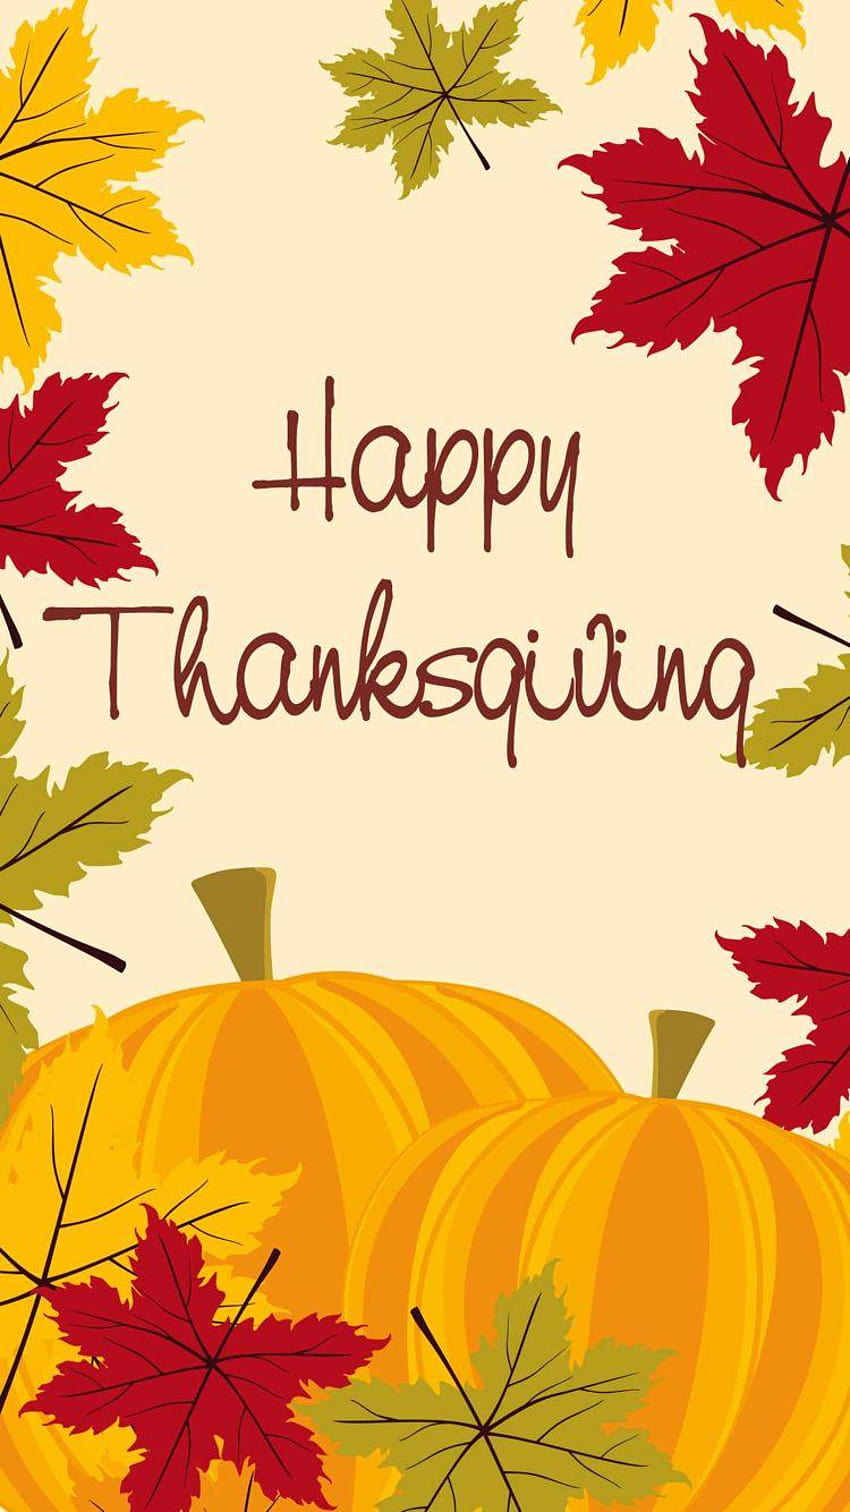 Thanksgiving Day 2021 Messages,Wishes, for Android, thanksgiving 2021 HD phone wallpaper